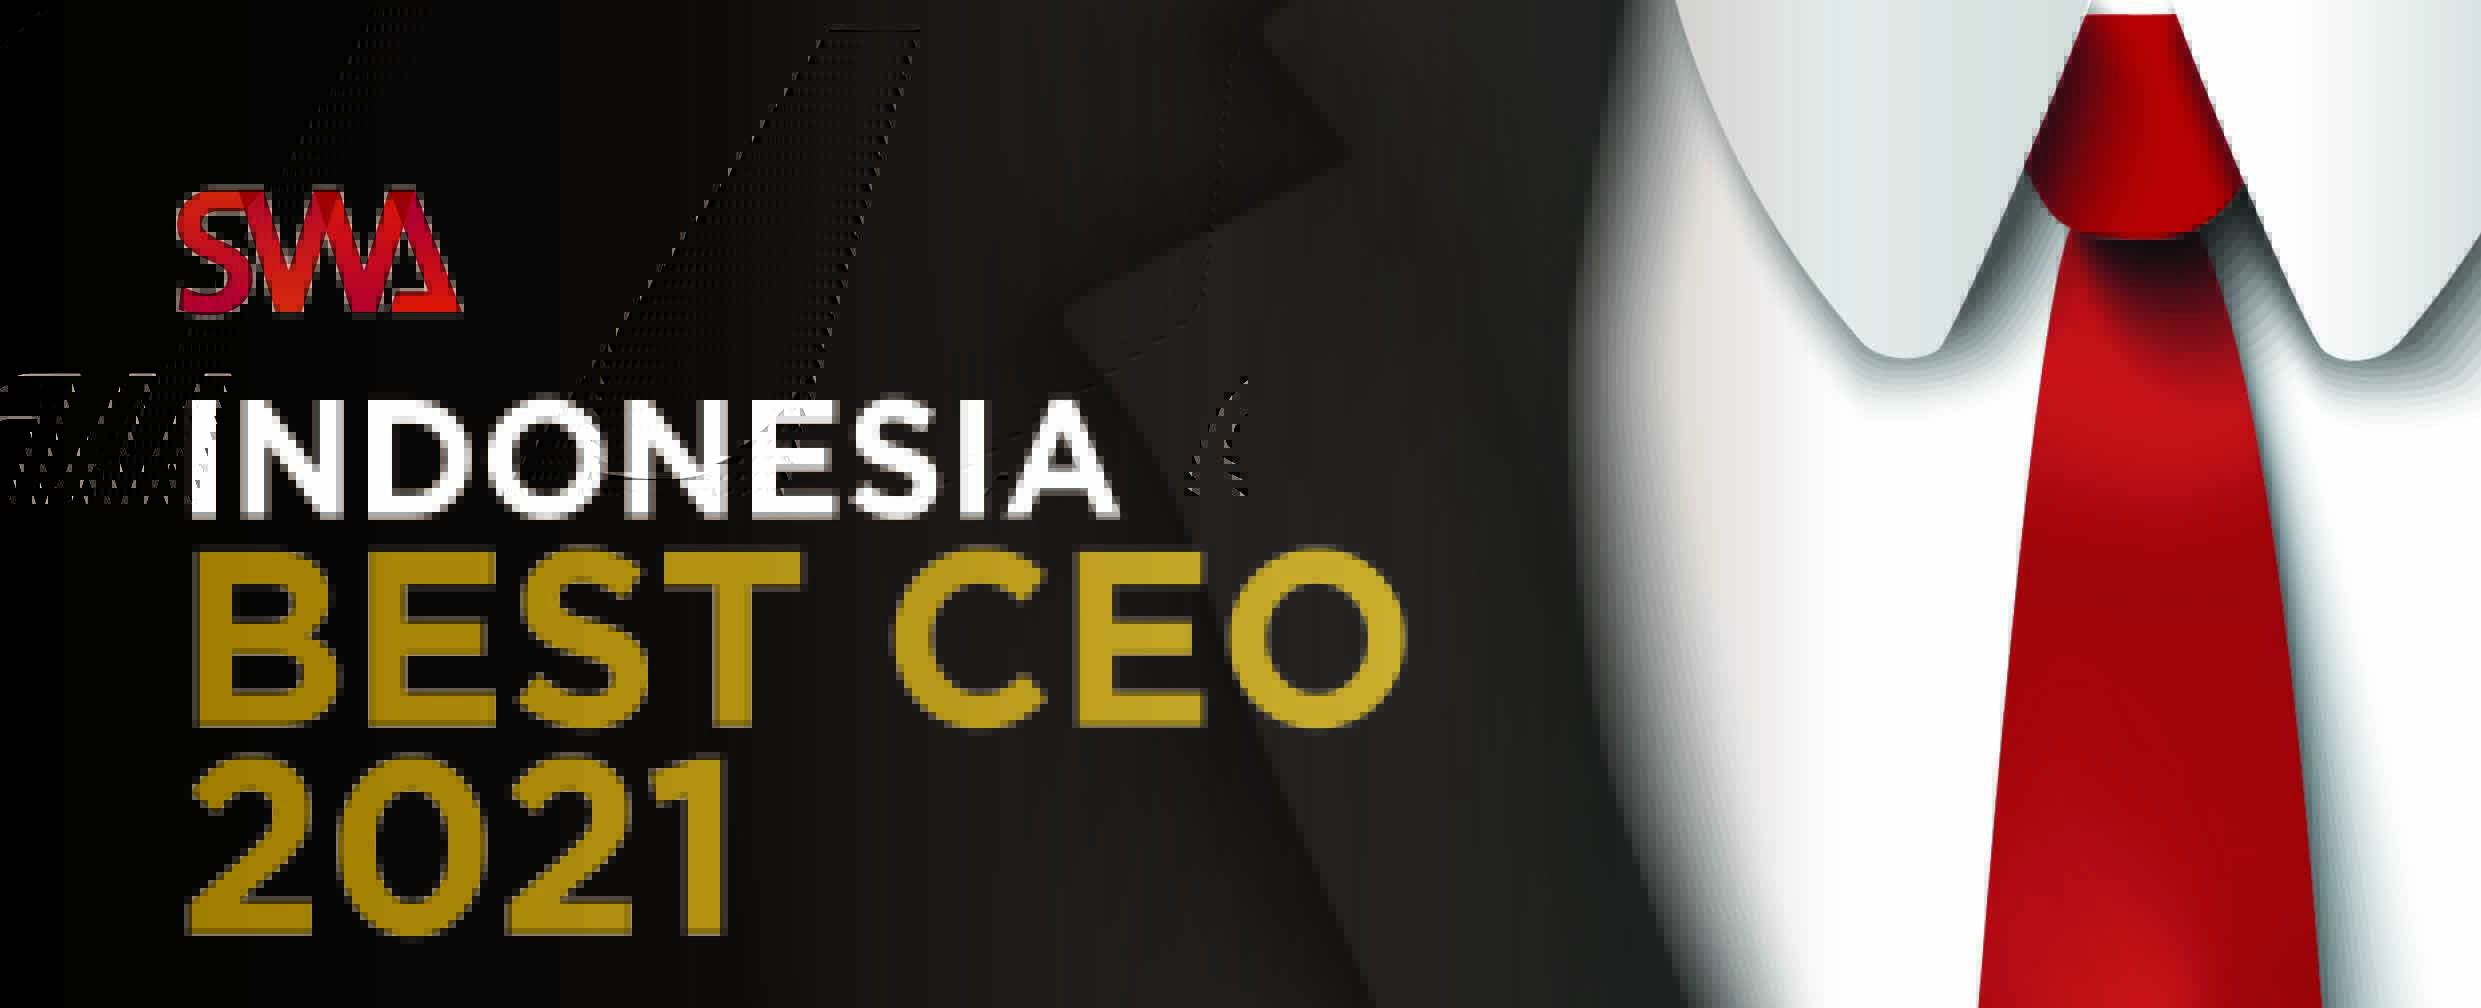 Indonesia Best CEO 2021